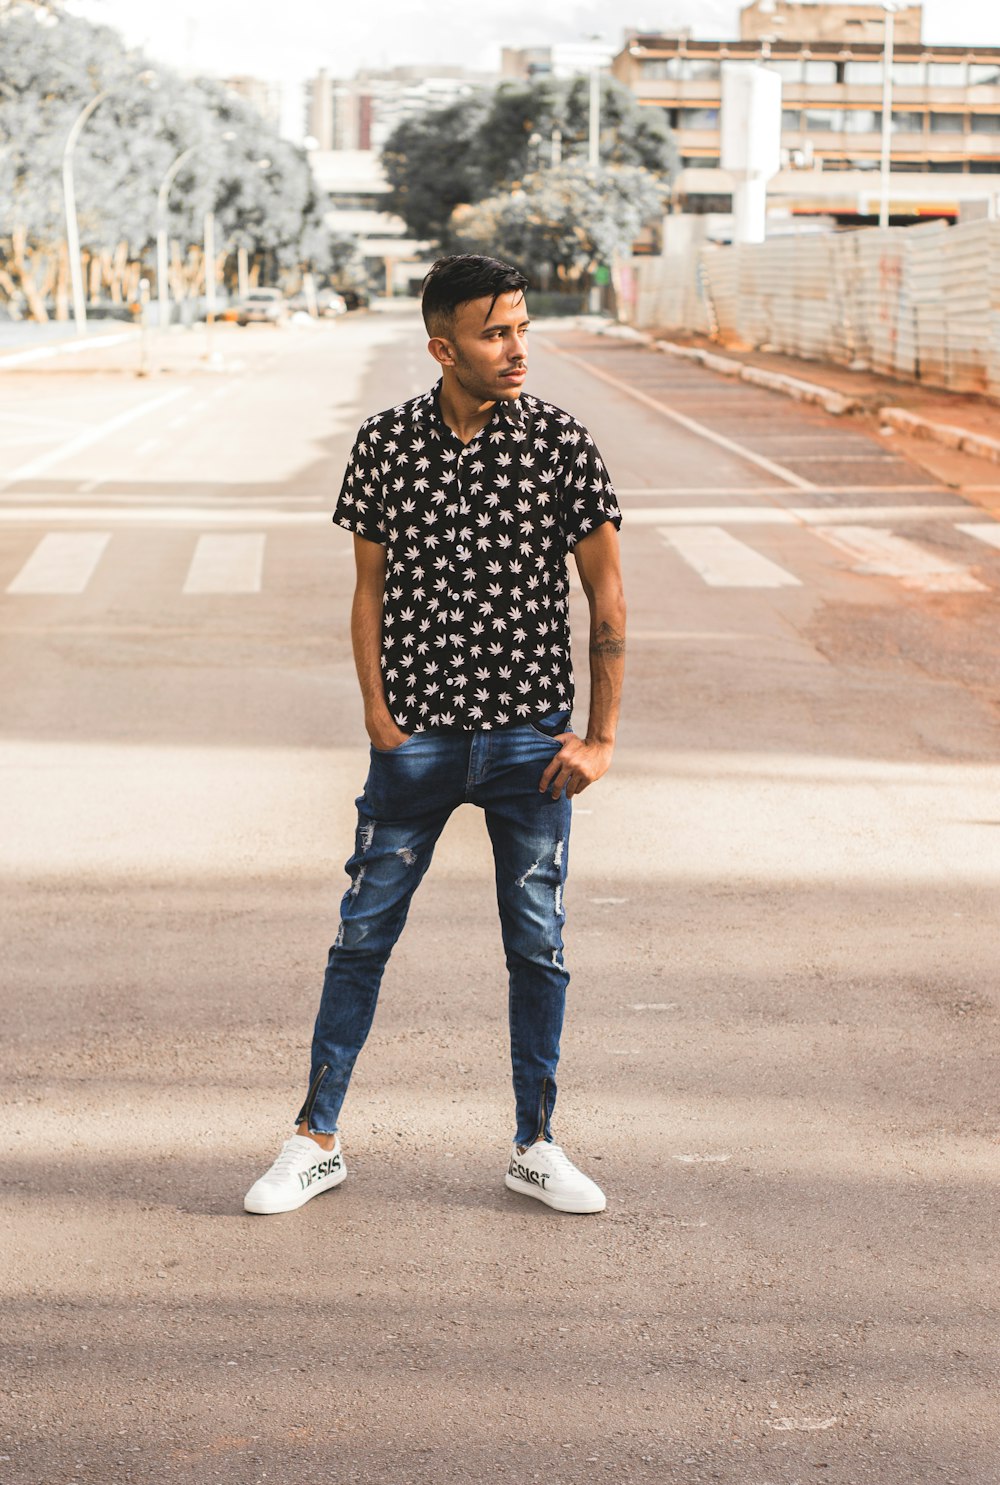 Man in black and white polka dot shirt and blue denim jeans standing on  road during photo – Free Clothing Image on Unsplash